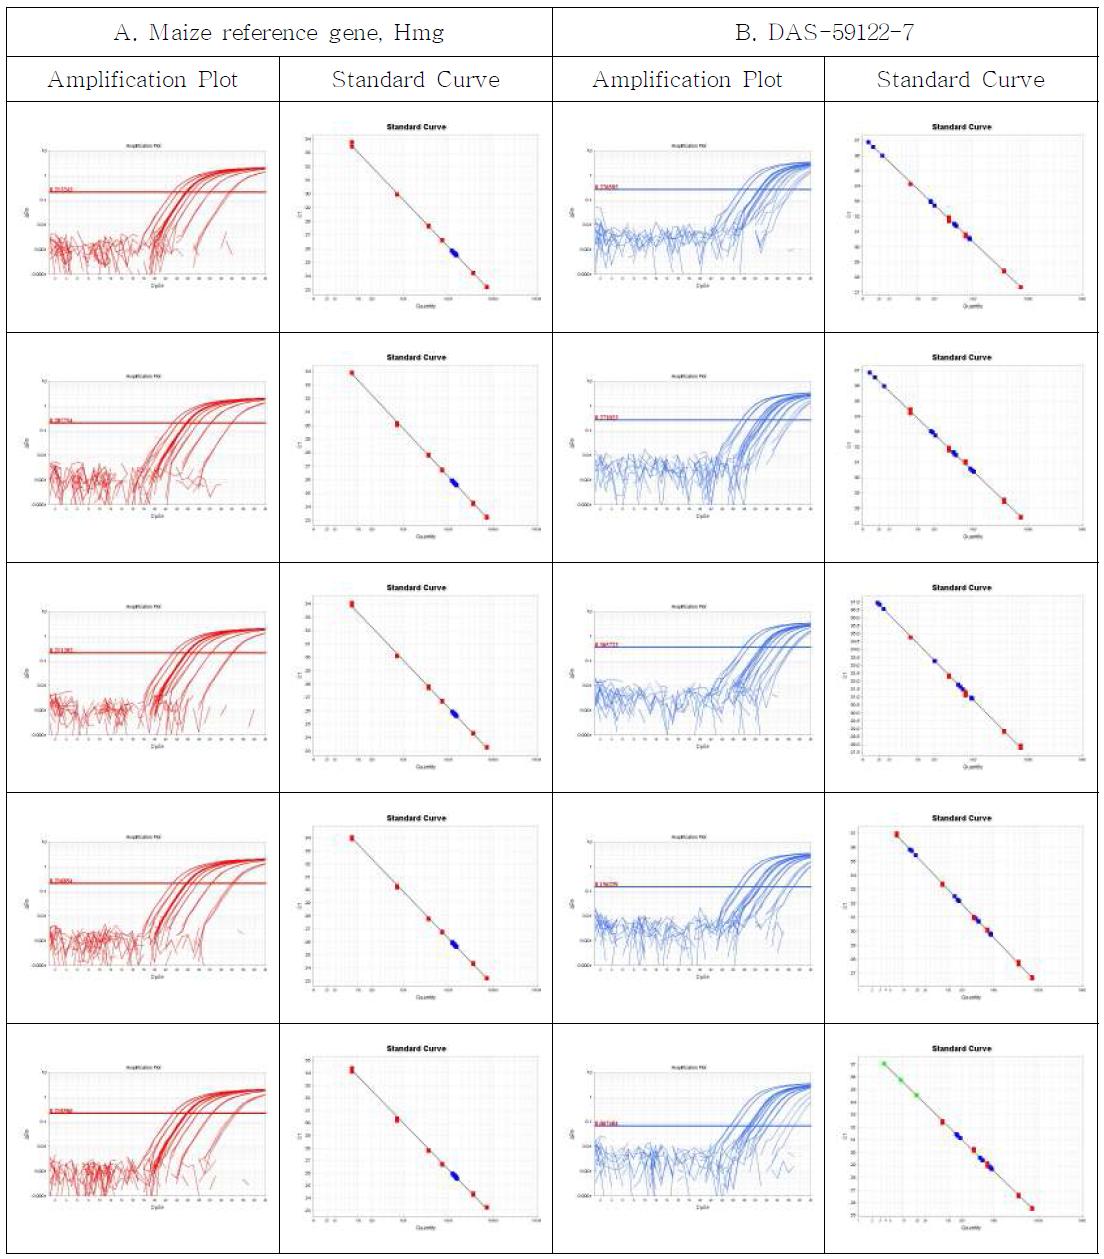 Amplification plots and standard curves for DAS-59122-7 event-specific quantitative Real-time PCR method using gradient-diluted DAS-59122-7 CRM genomic DNA as the template, performed by Lab. 2. A. Amplification graph and standard curves for the maize reference gene, Hmg assay. B. Amplification graph and standard curves for the DAS-59122-7-event specific assay.